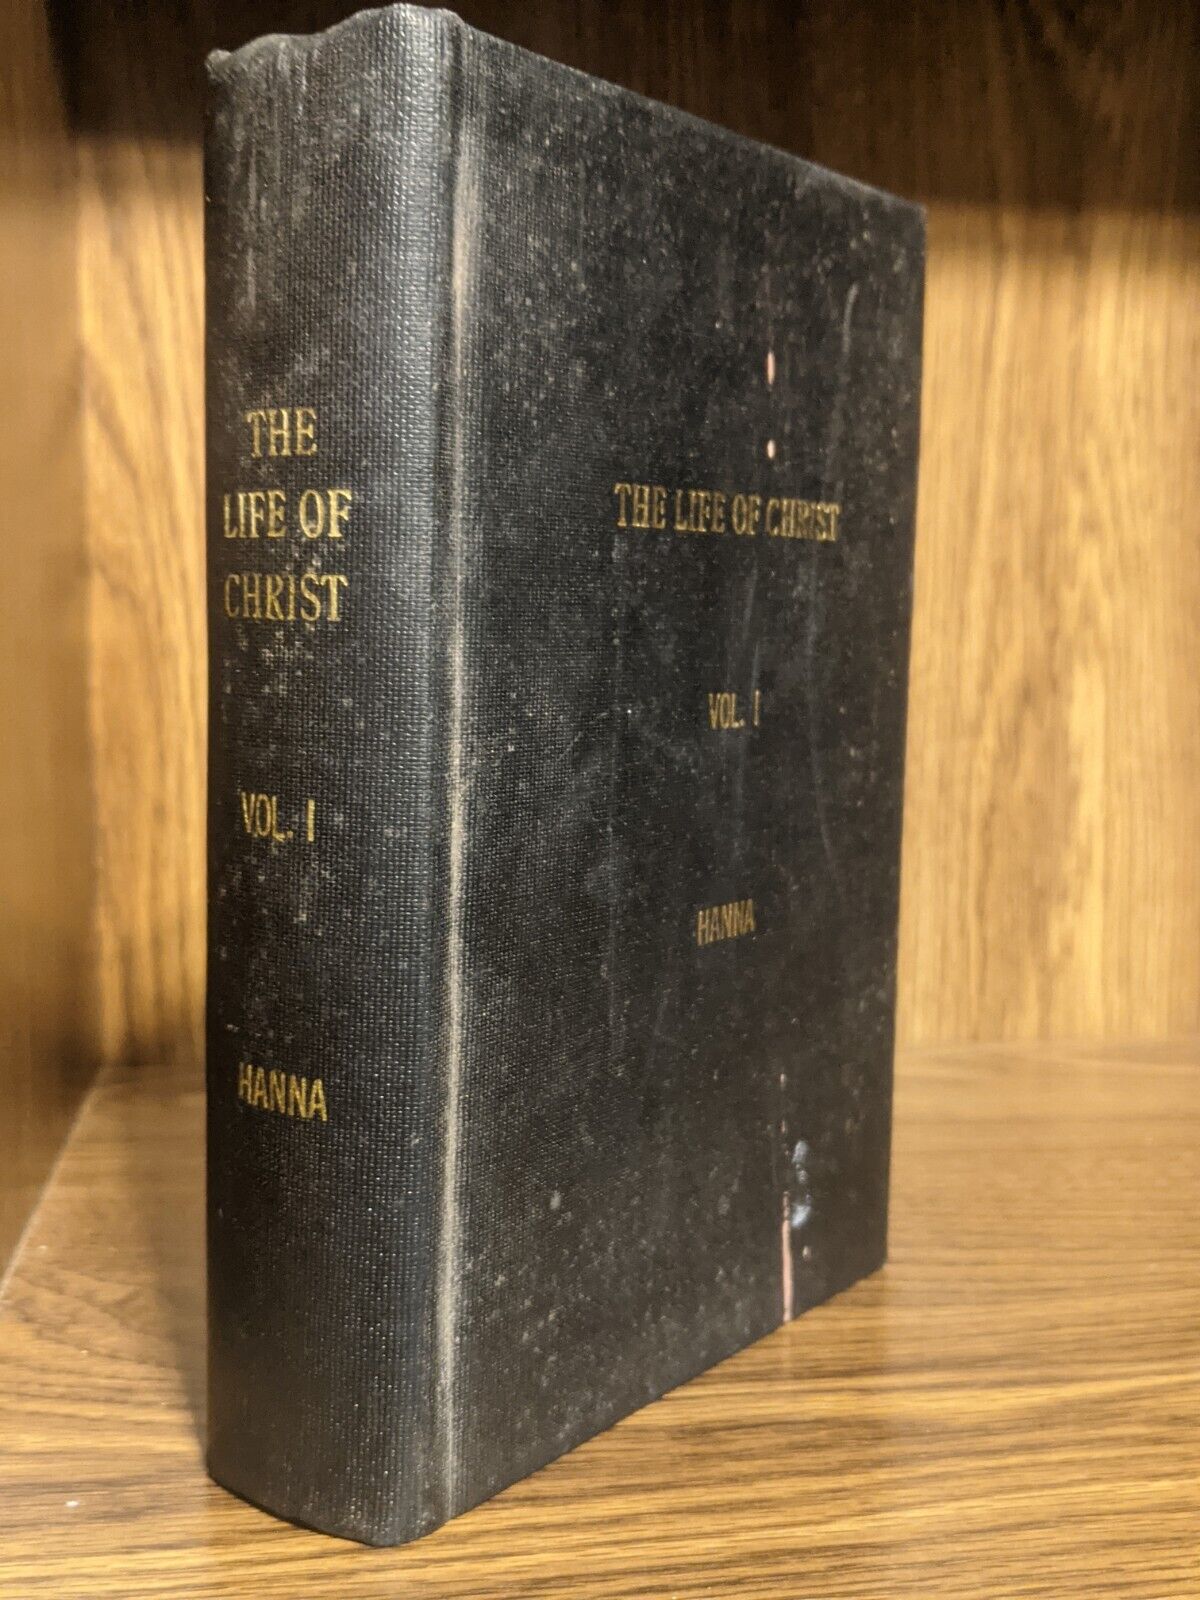 Antique 1871 The Life Of Christ by Rev. William Hanna Hardcover